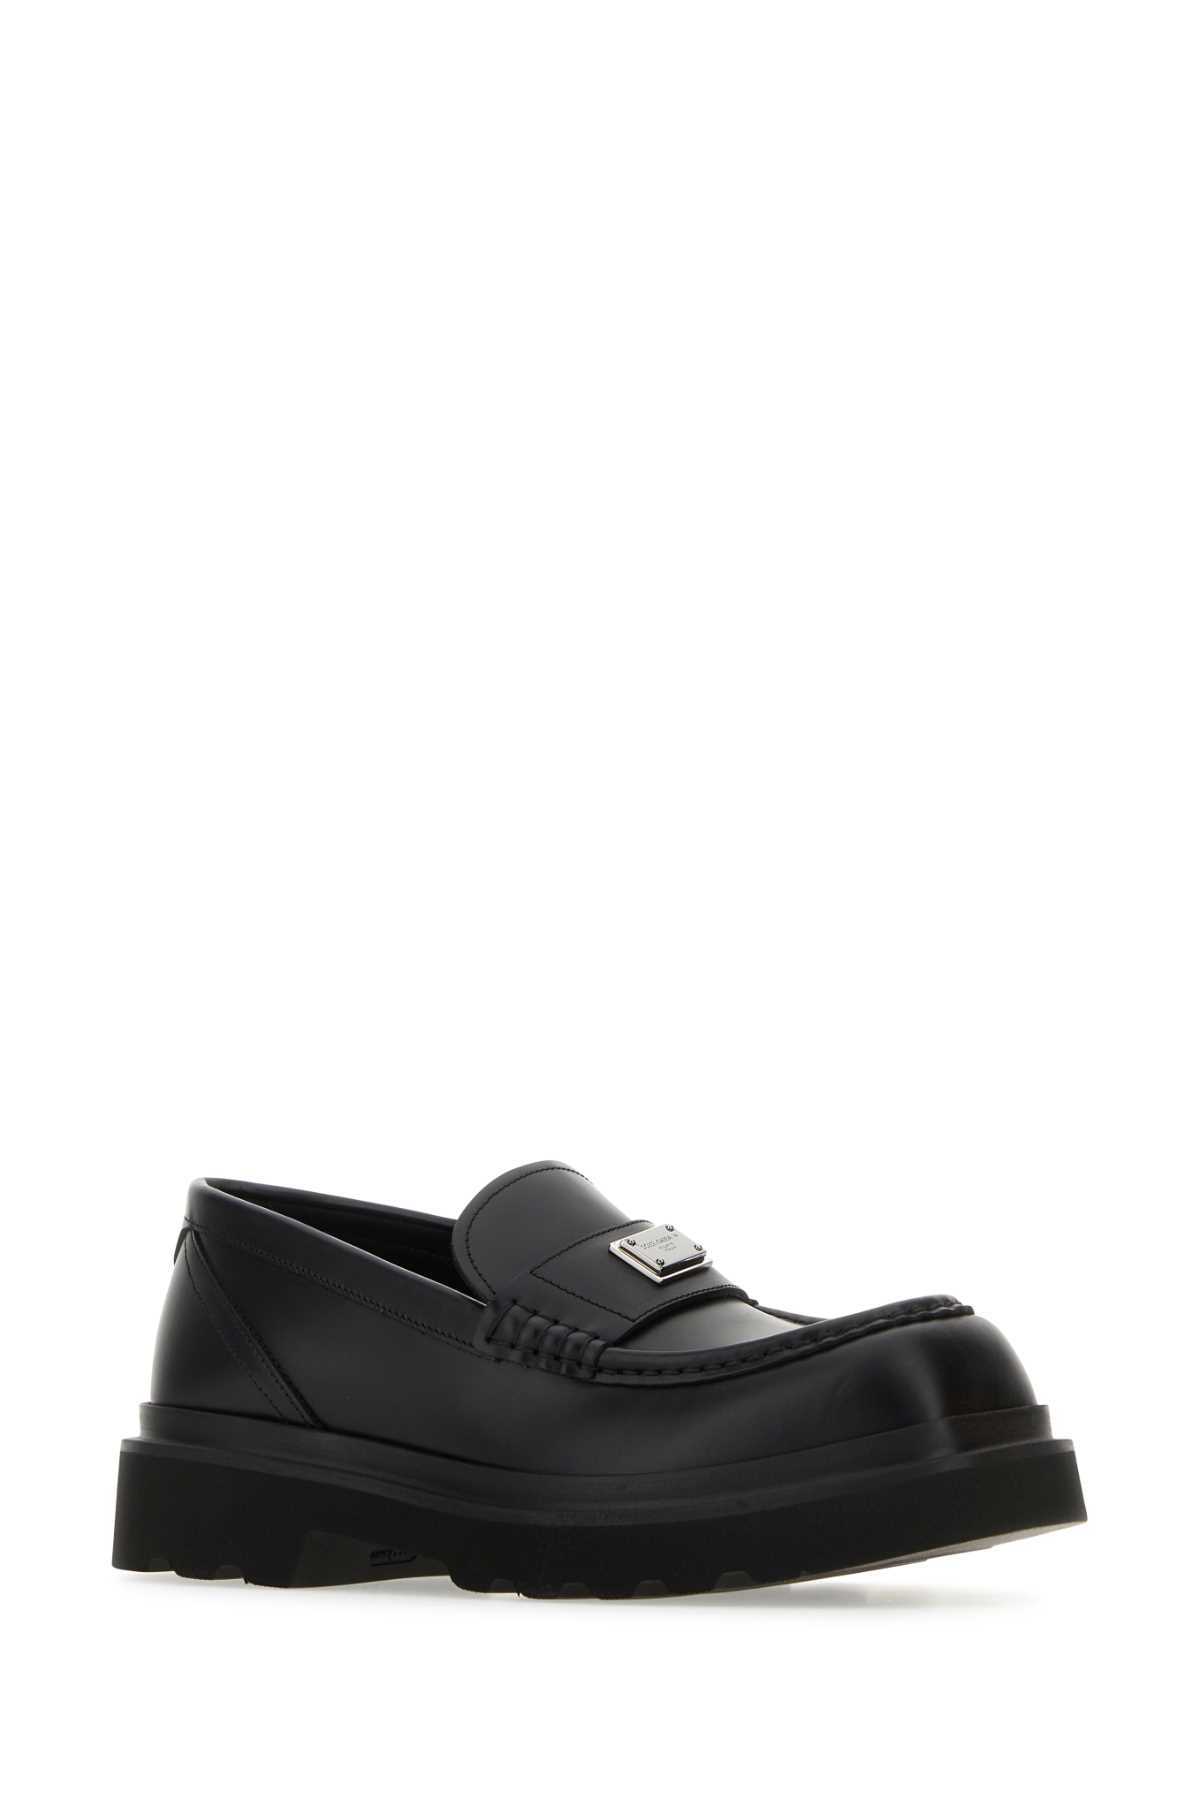 Dolce & Gabbana Black Leather Loafers